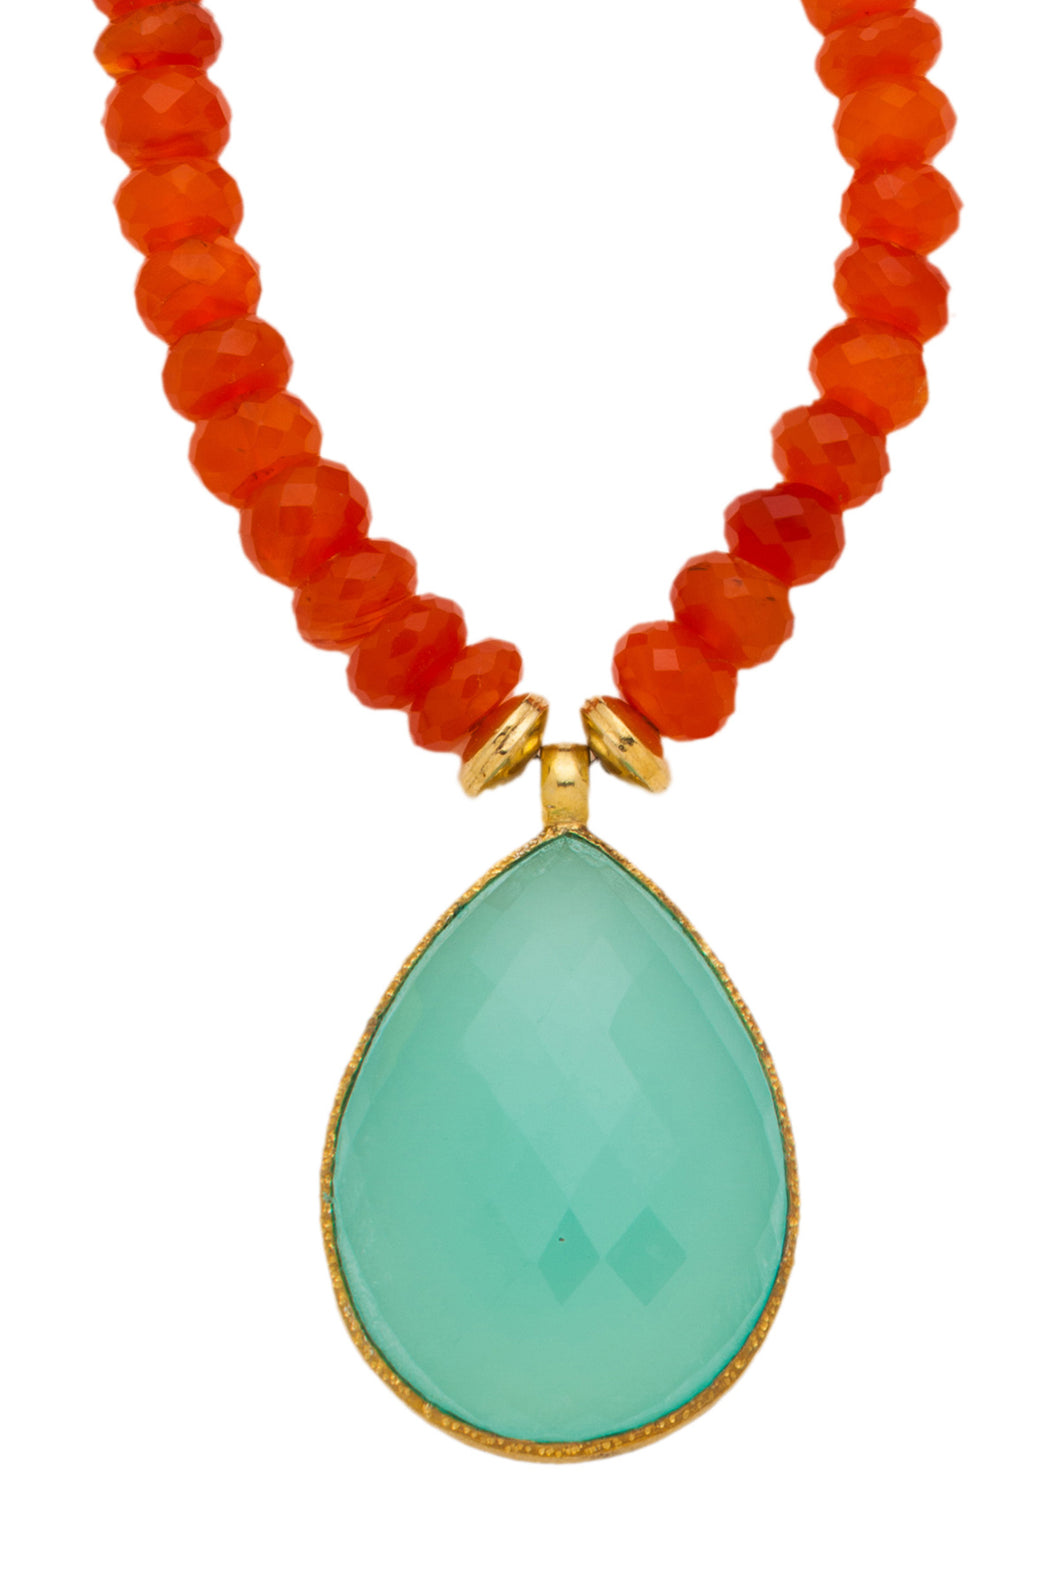 Carnelian gemstone necklace with pendant of Chalcedony in 24kt gold vermeil NF220-CC